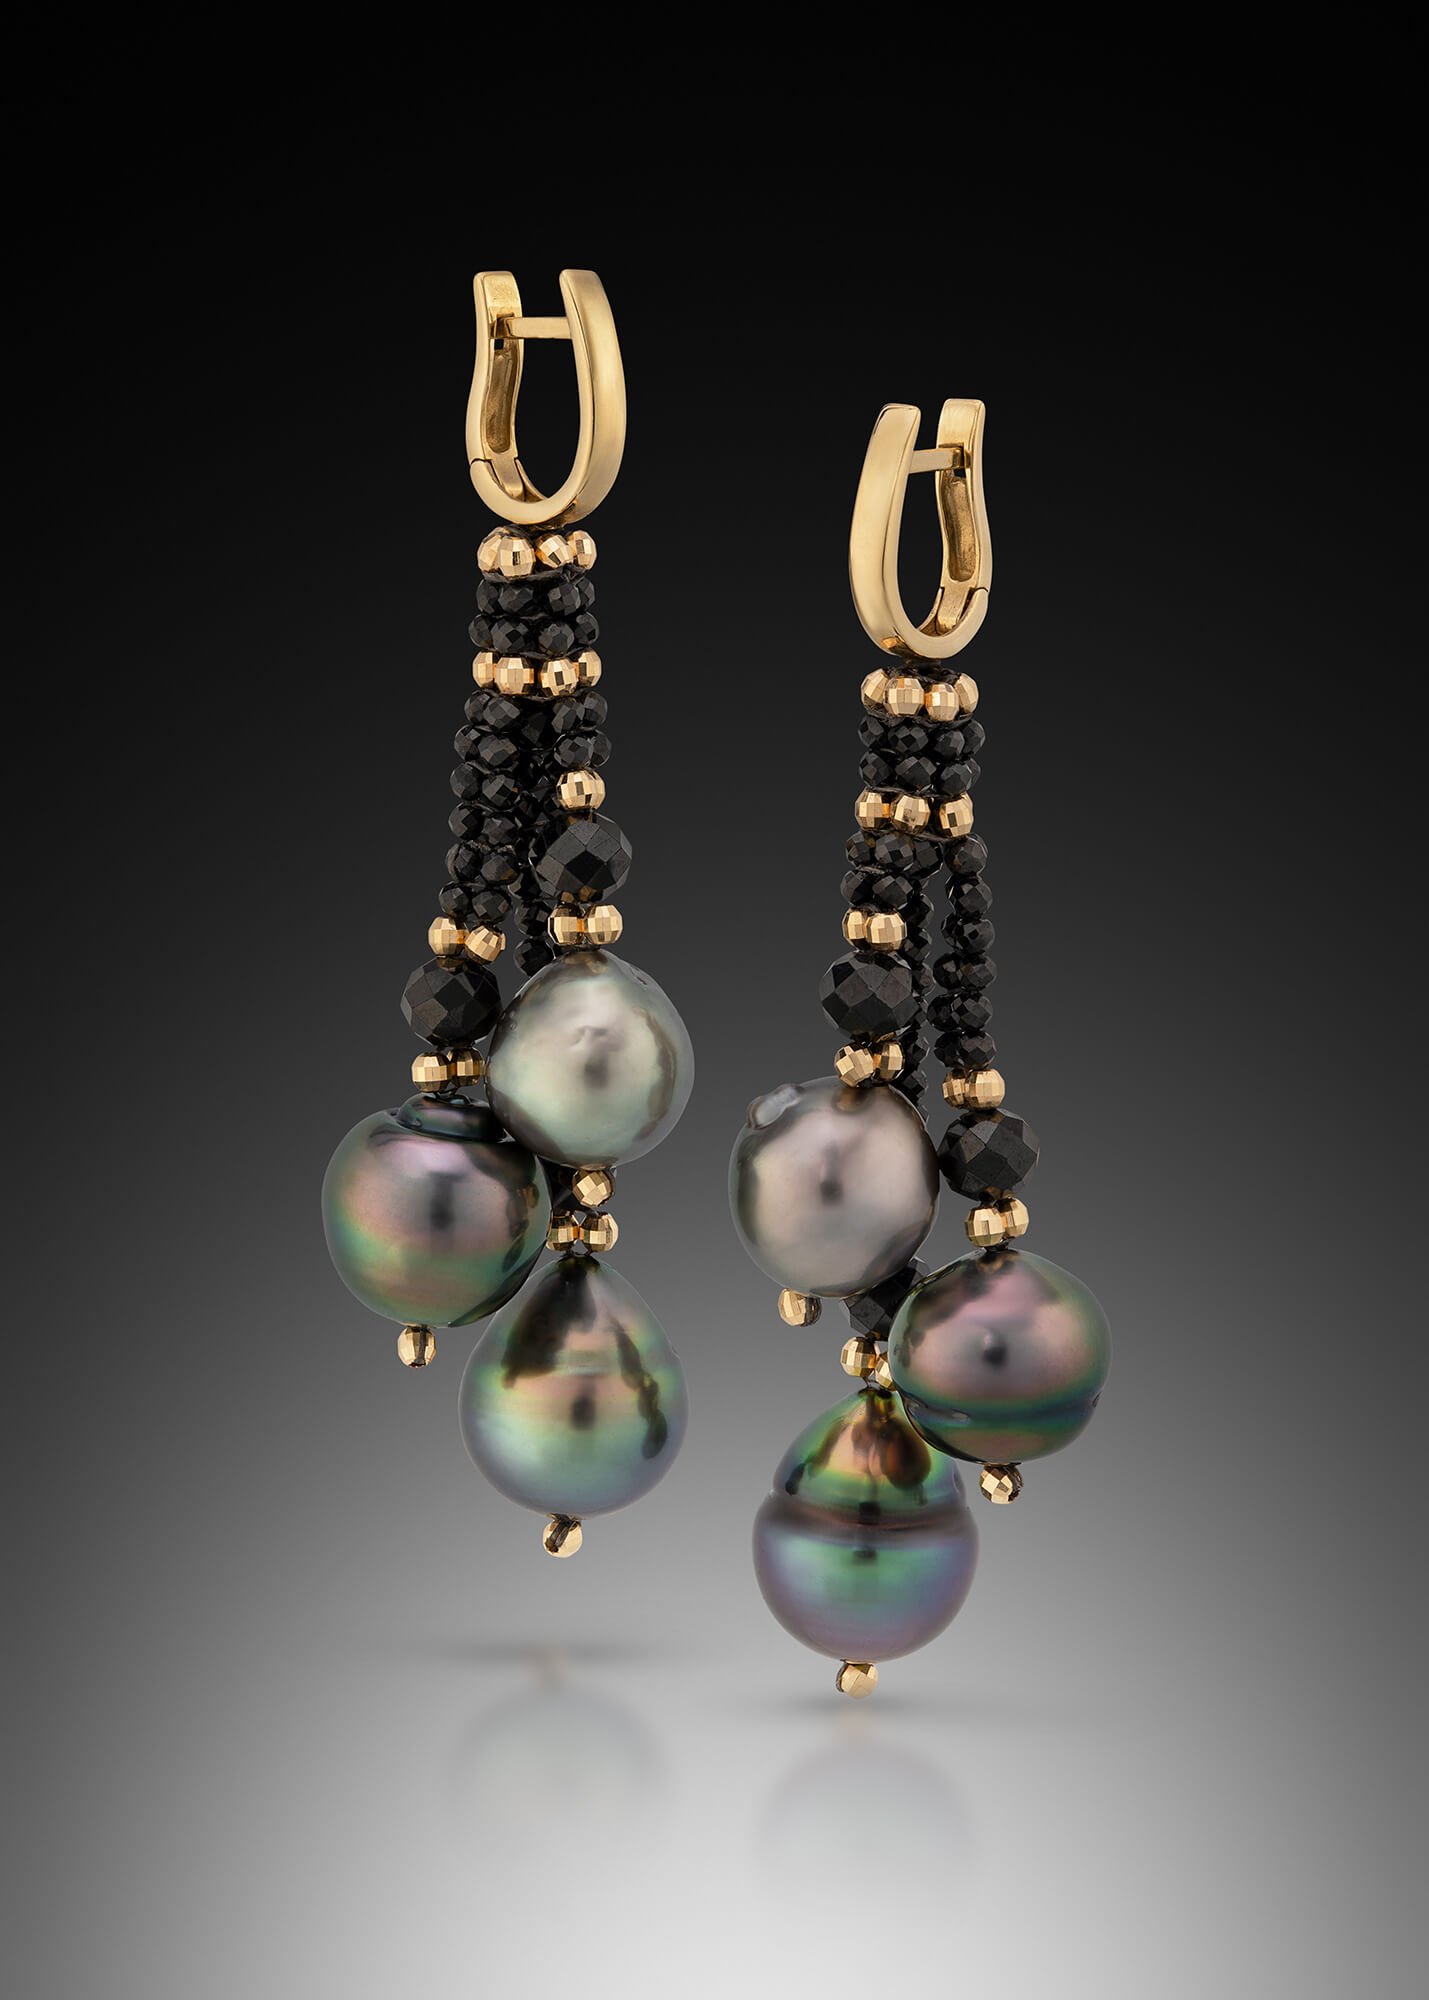 Tahitian Pearl Dangles. These earrings are hand woven of 14k gold,  black spinel beads, and Tahitian pearls.